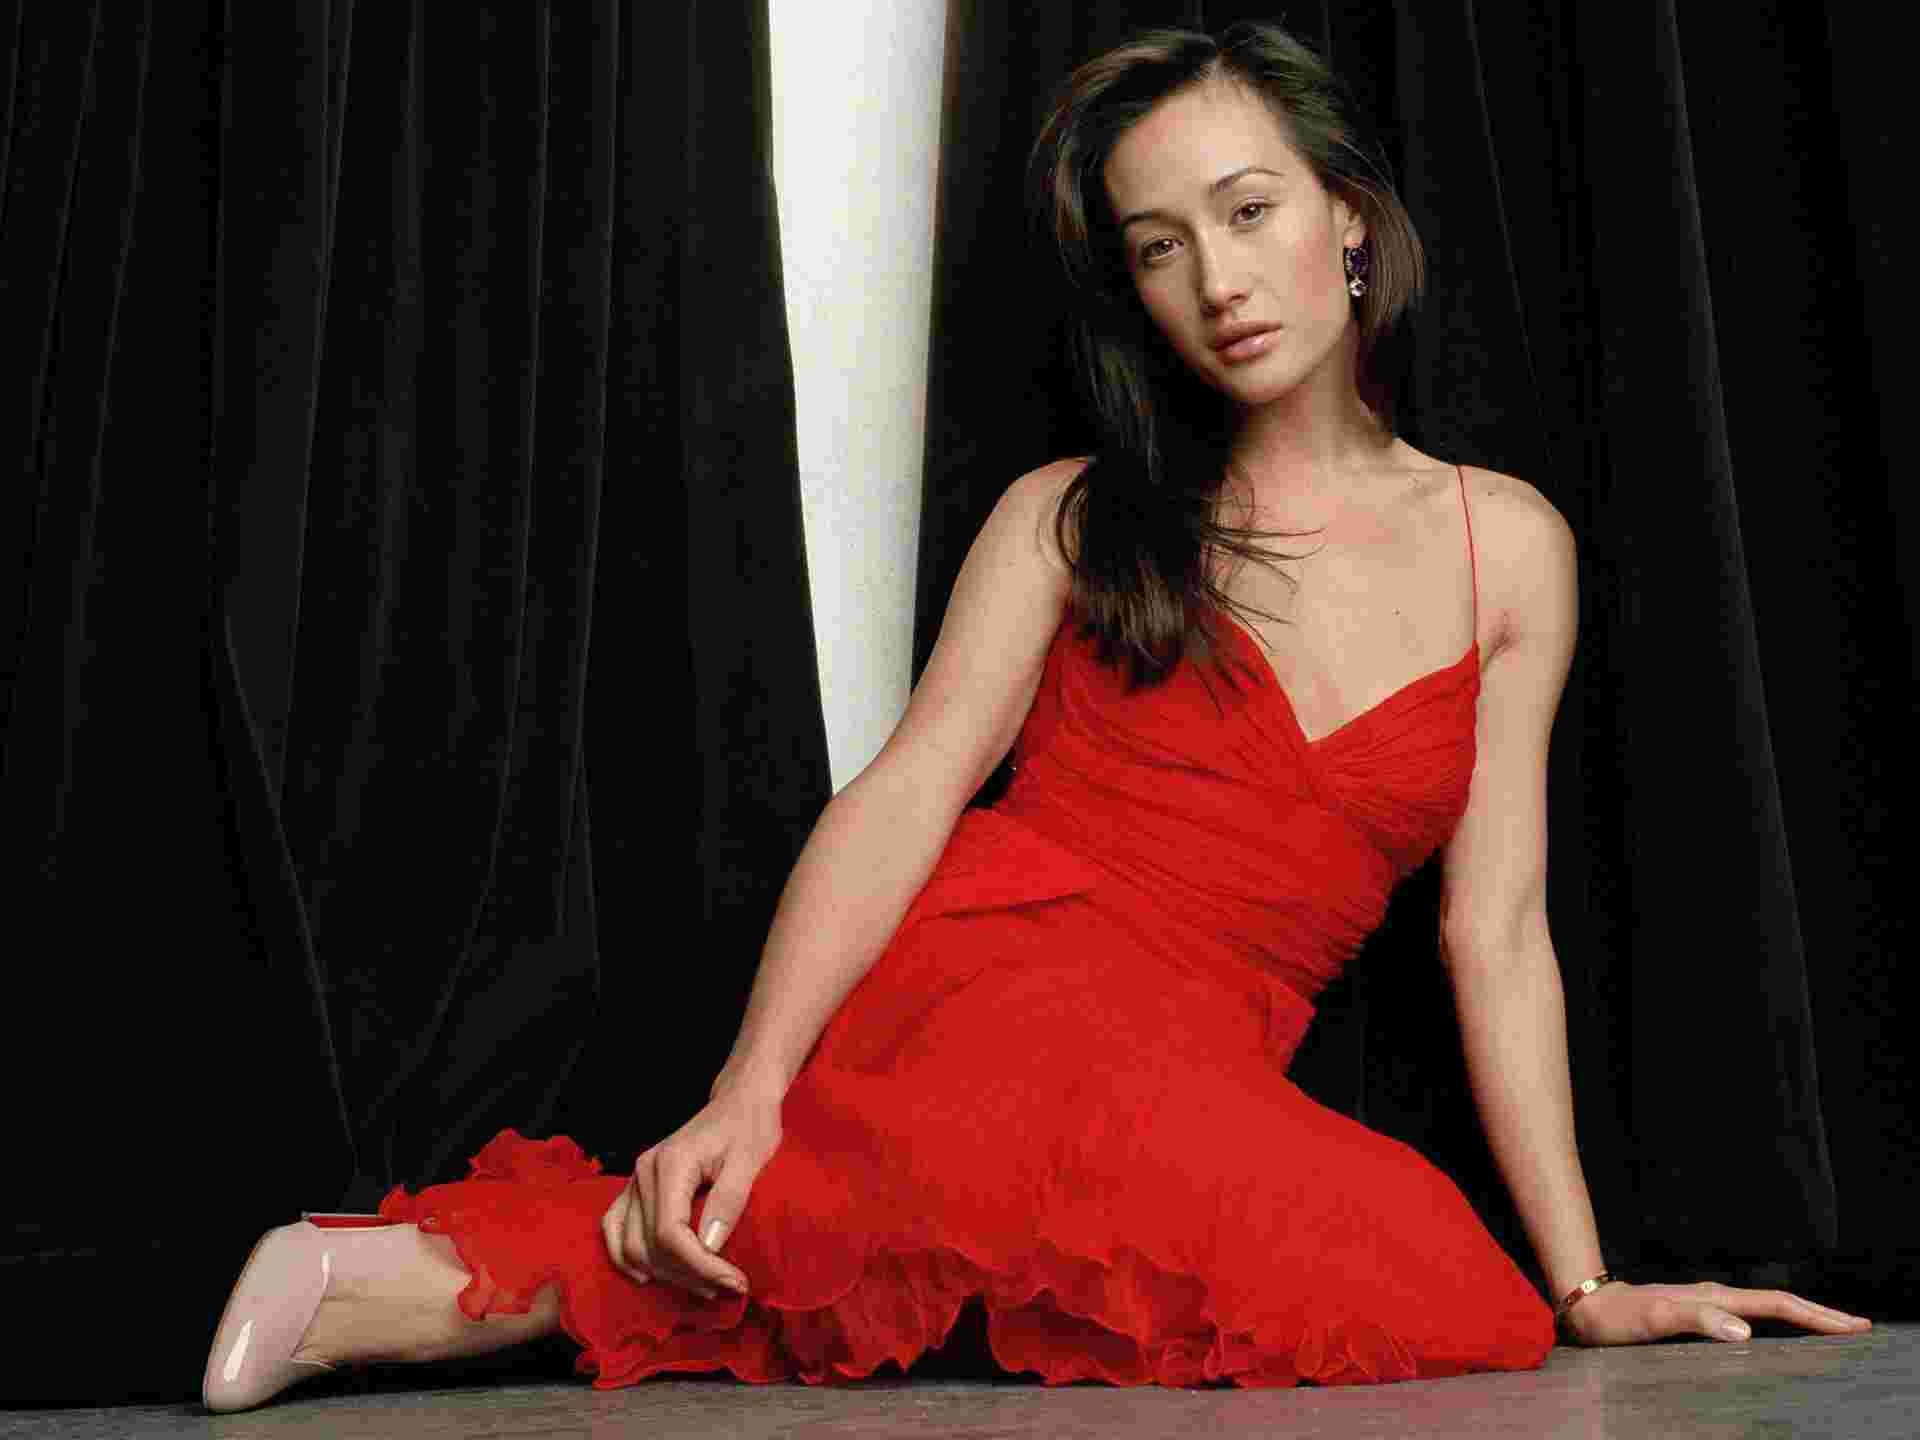 1920x1440 Another Wallpaper of Maggie Q